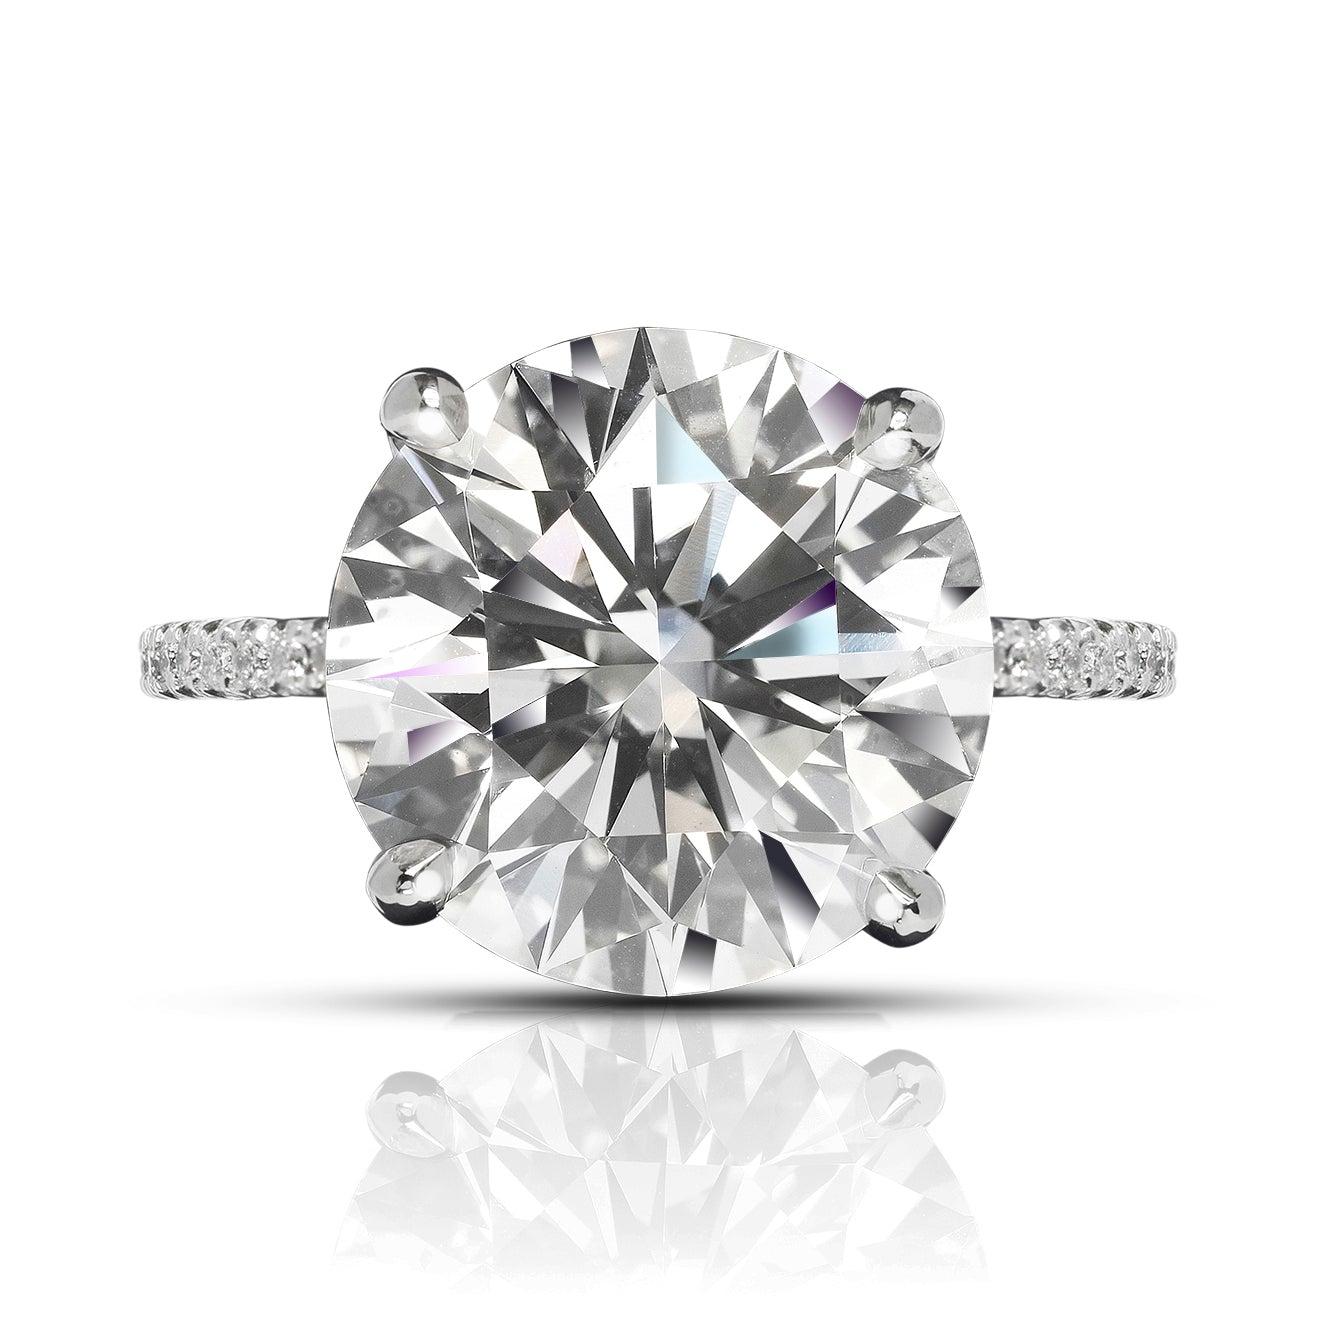 RILEY DIAMOND ENGAGEMENT 18K WHITE GOLD RING BY MIKE NEKTA
GIA CERTIFIED
 
Center Diamond:
Carat Weight: 6 Carat
Color: I
Clarity: SI2  
Style: ROUND BRILLIANT CUT
Measurements: ﻿11.7 - 11.8 x 7.2 mm

Ring:
Metal: 18K WHITE GOLD
Style: Sidestones